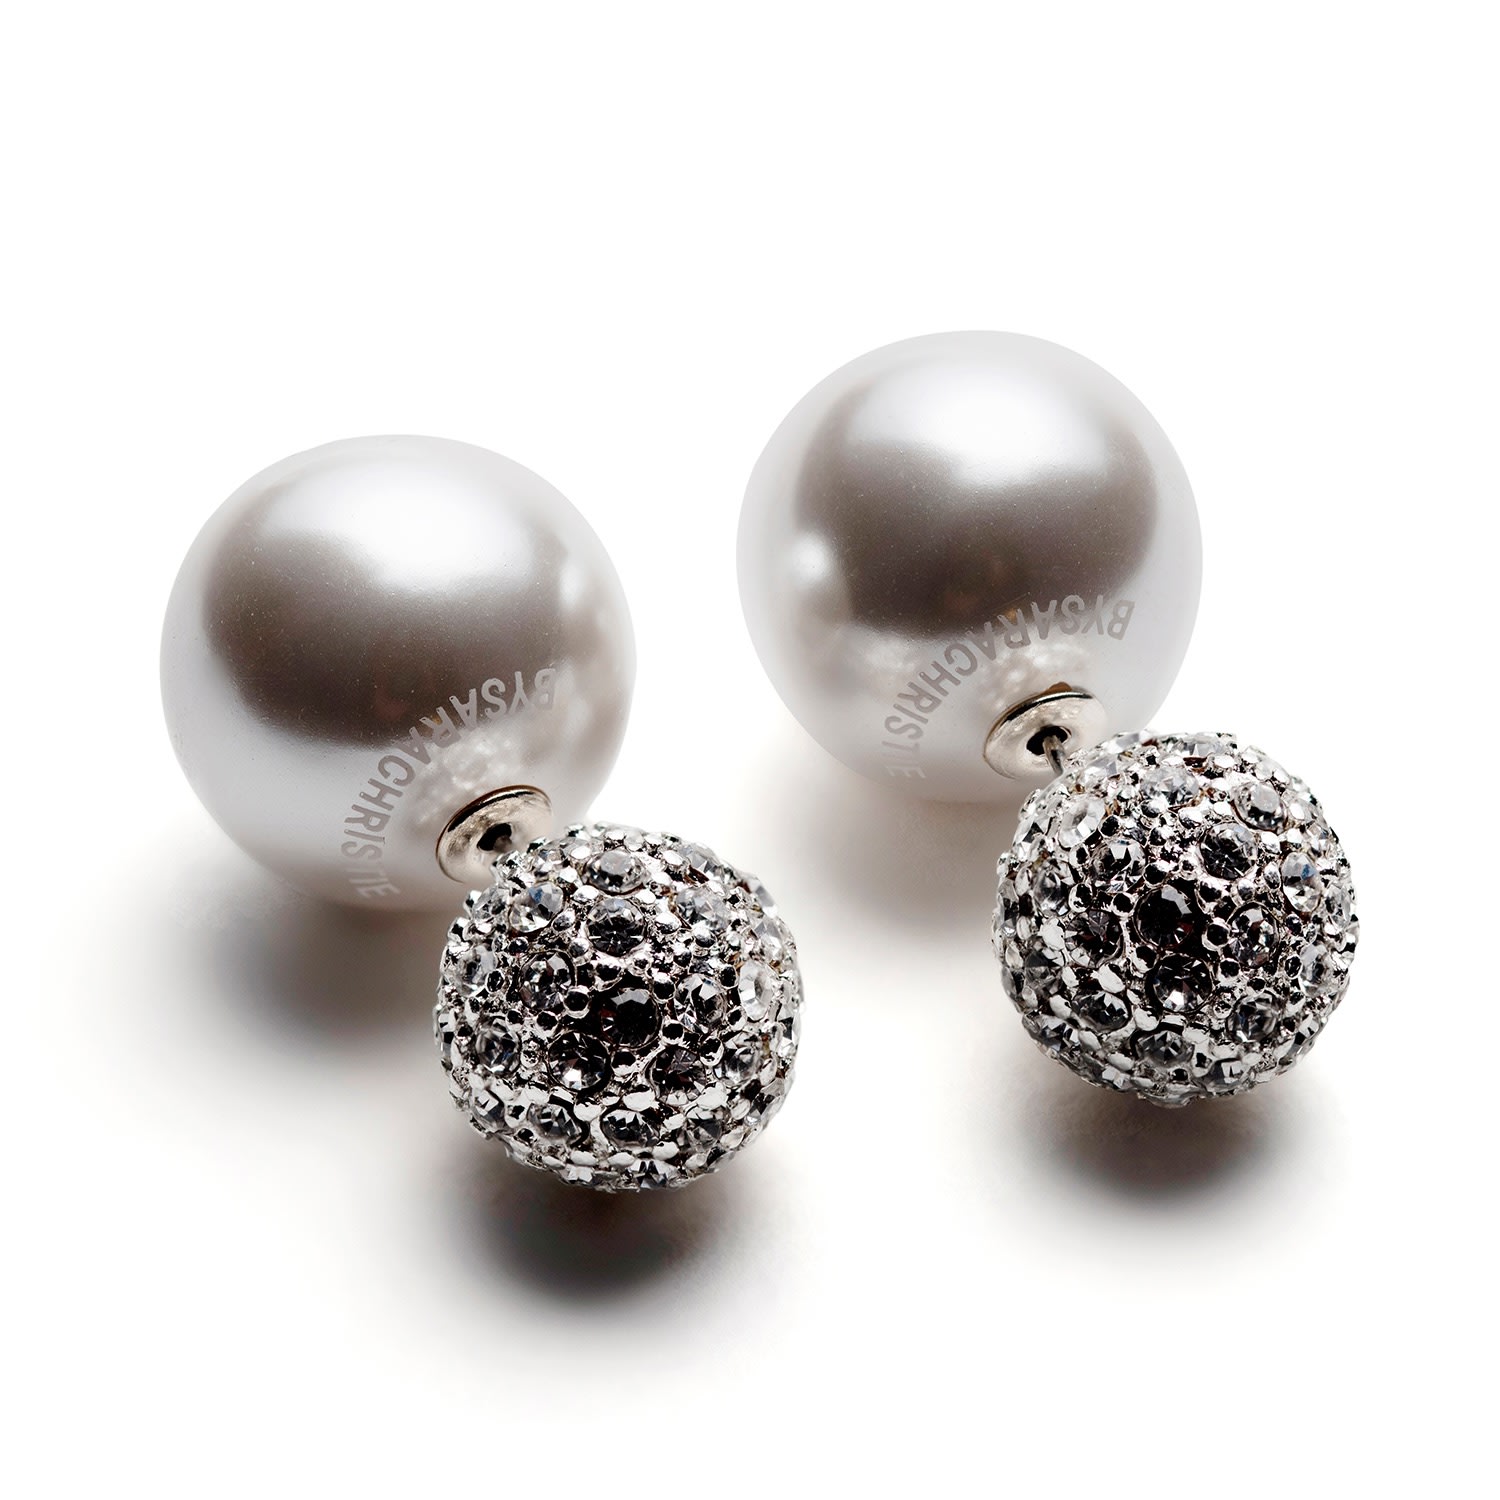 Women’s Neutrals / Silver The Duchess - Opposites Attract - Pearl + Crystal Bysarachristie